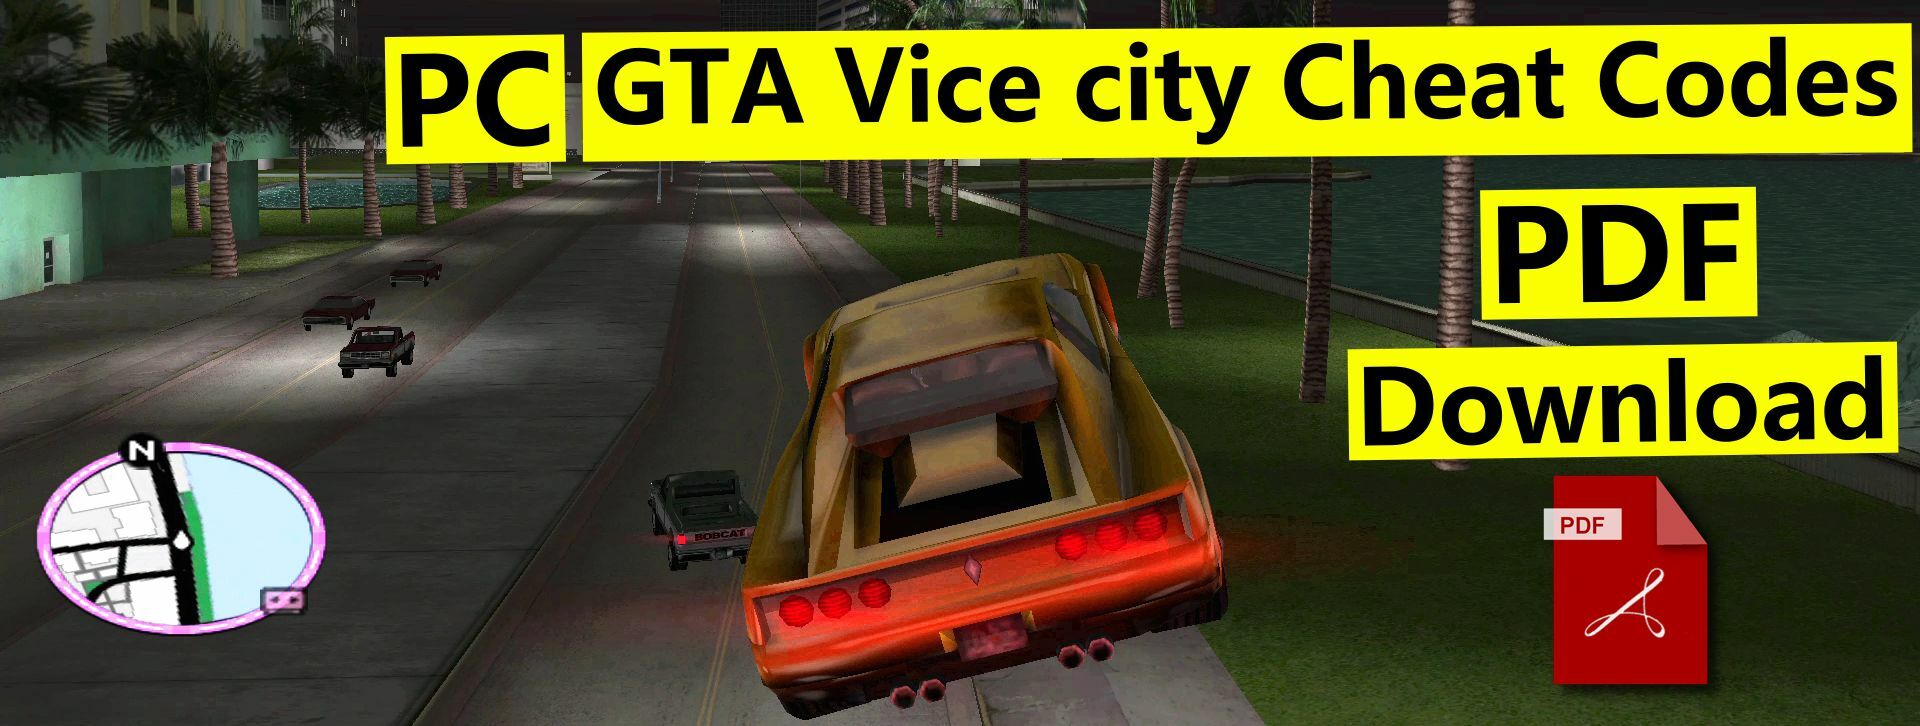 GTA vice city cheat codes pdf download for PC